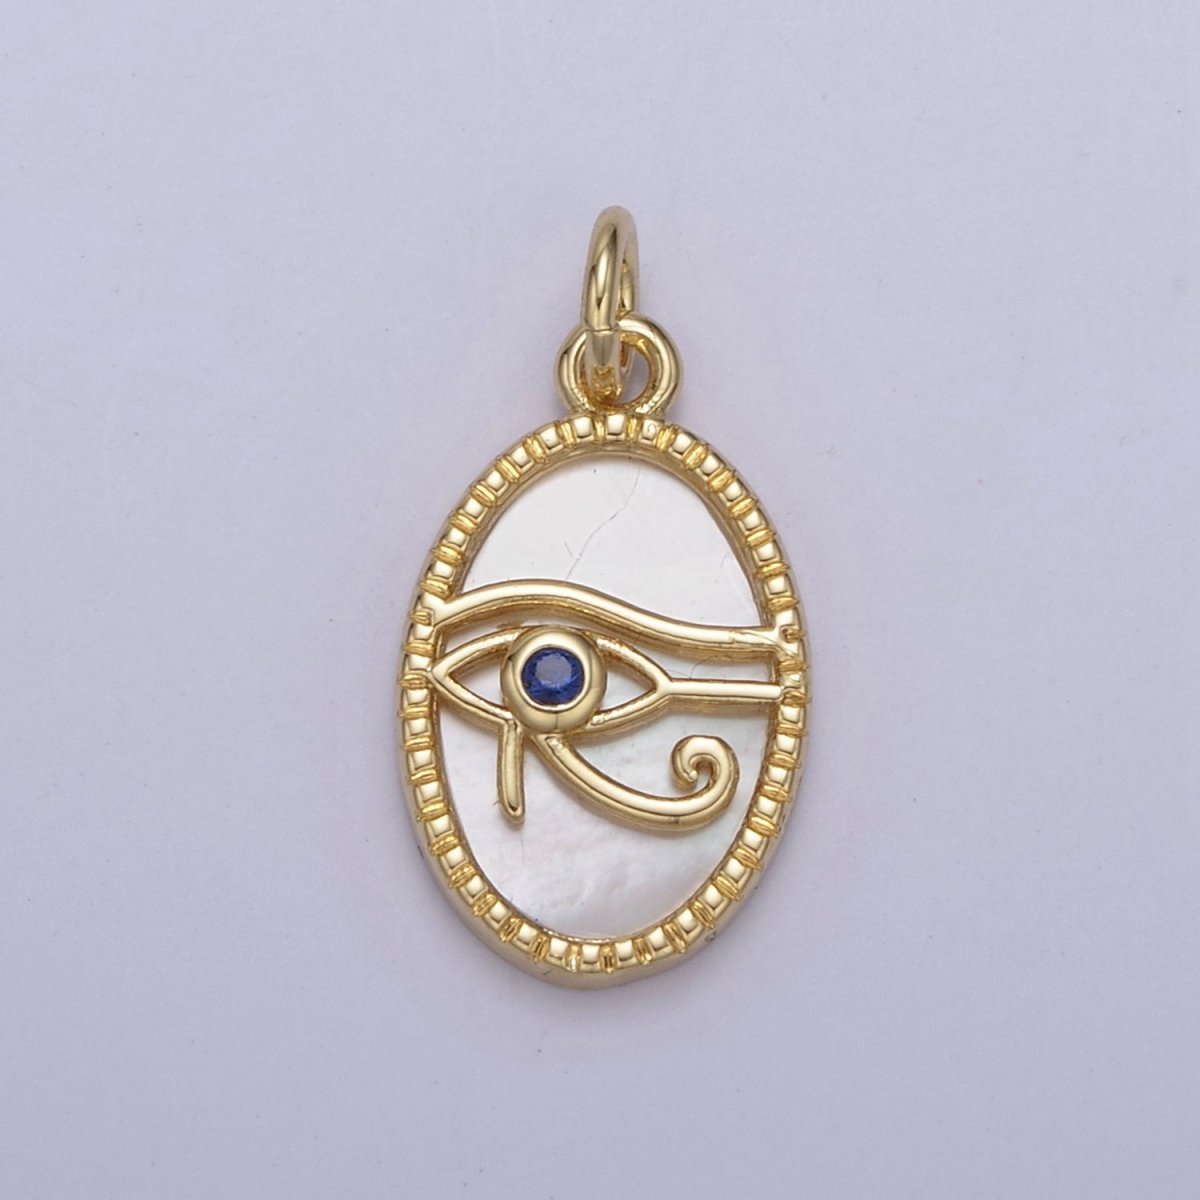 14K Gold Filled Pearl, Tiger Eye, Abalone Shell Charm Pendant Eye Of Ra Charm for Amulet Green Necklace Bracelet Jewelry Making N-771 - N-773 - DLUXCA